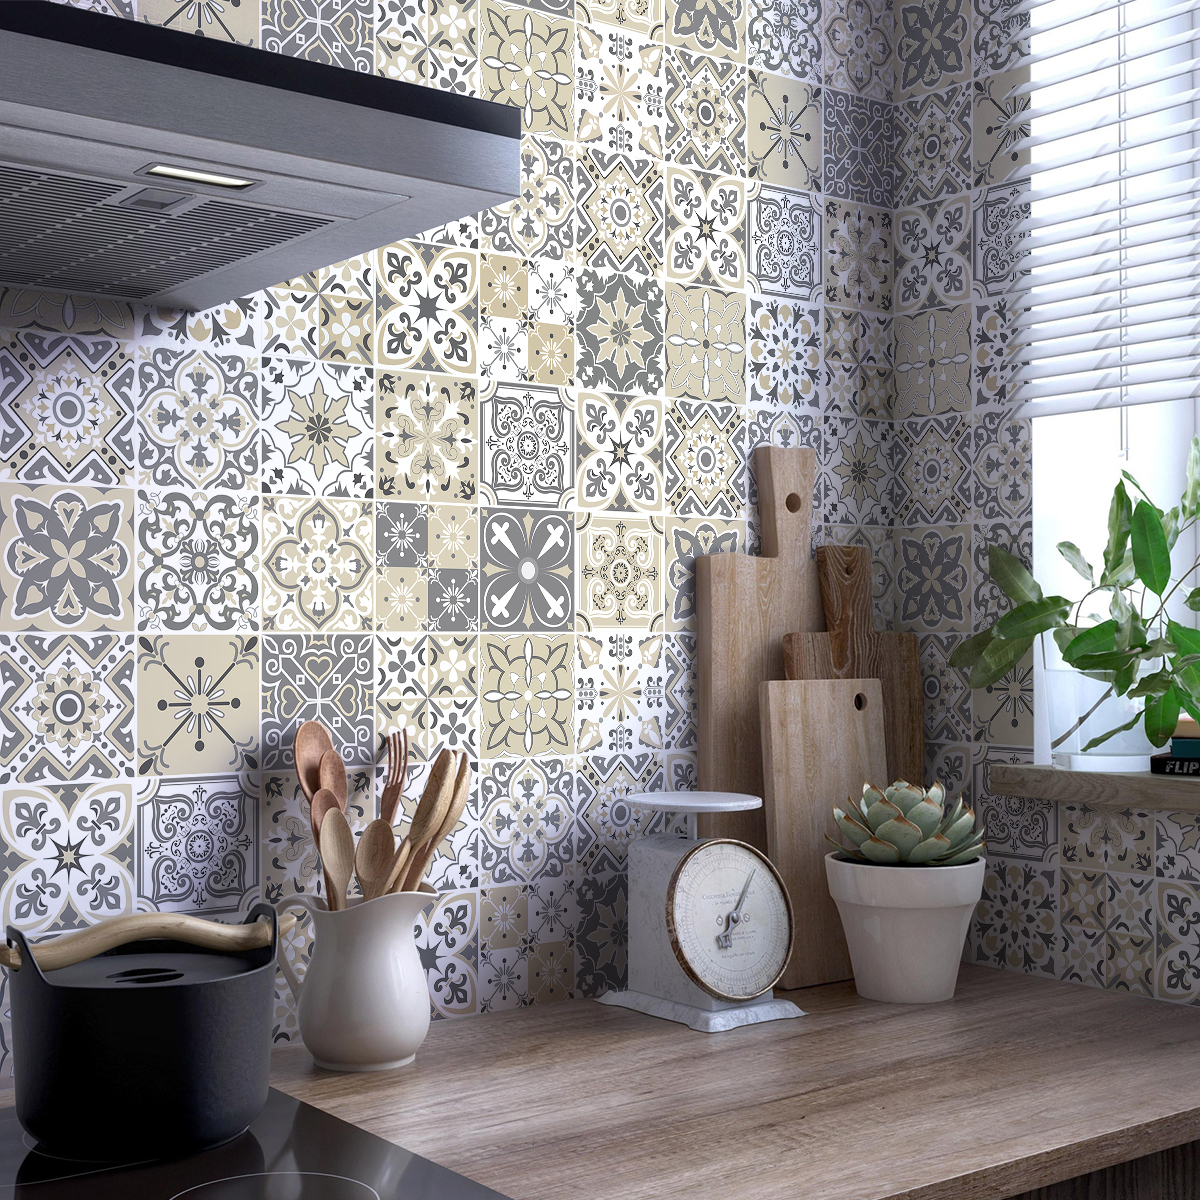 30 wall stickers cement tiles azulejos turchi